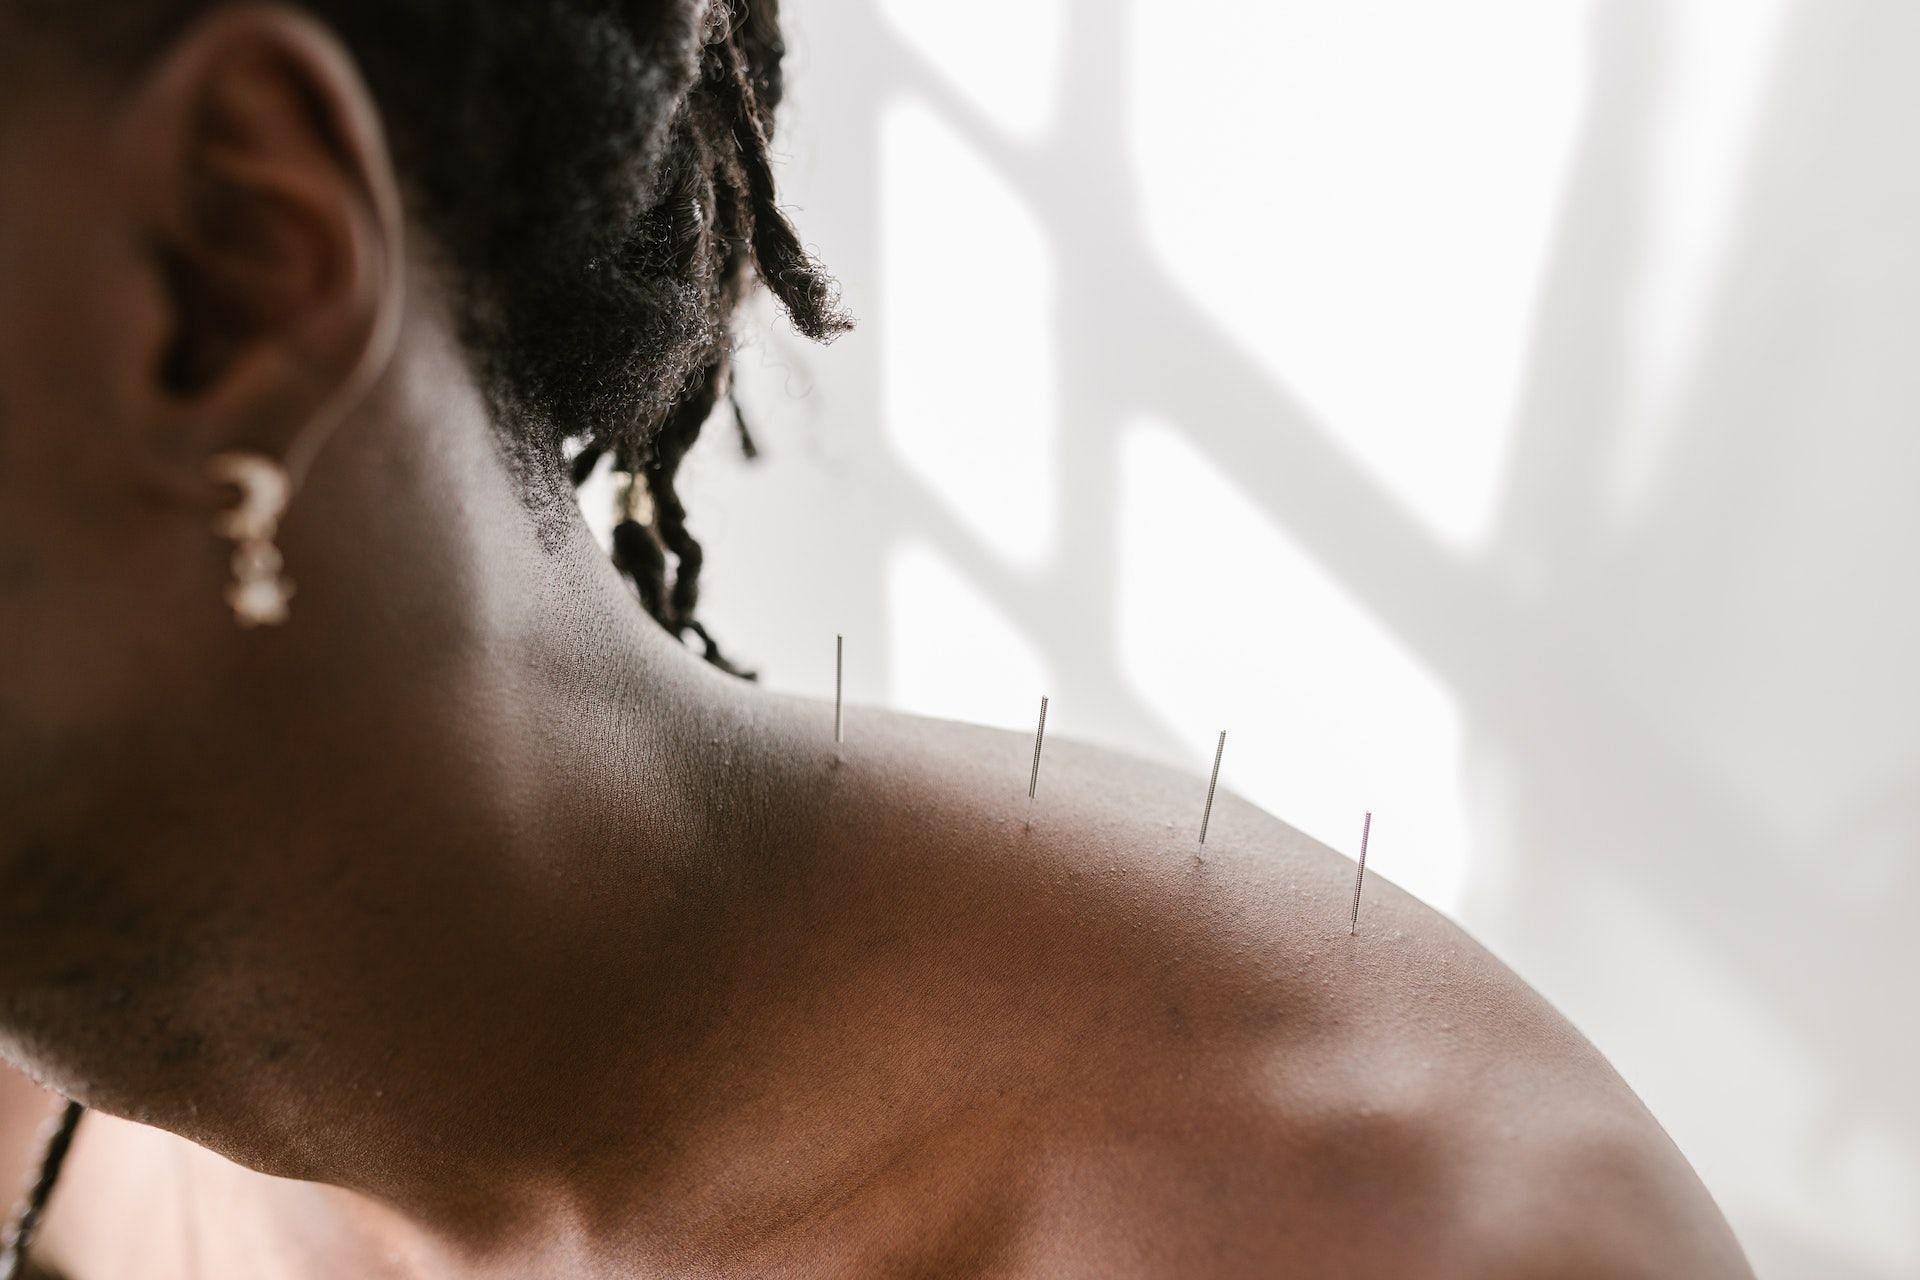 Acupuncture for weight loss can work by balancing hormones and maintaining cognitio. (Photo via Pexels/RODNAE Productions)